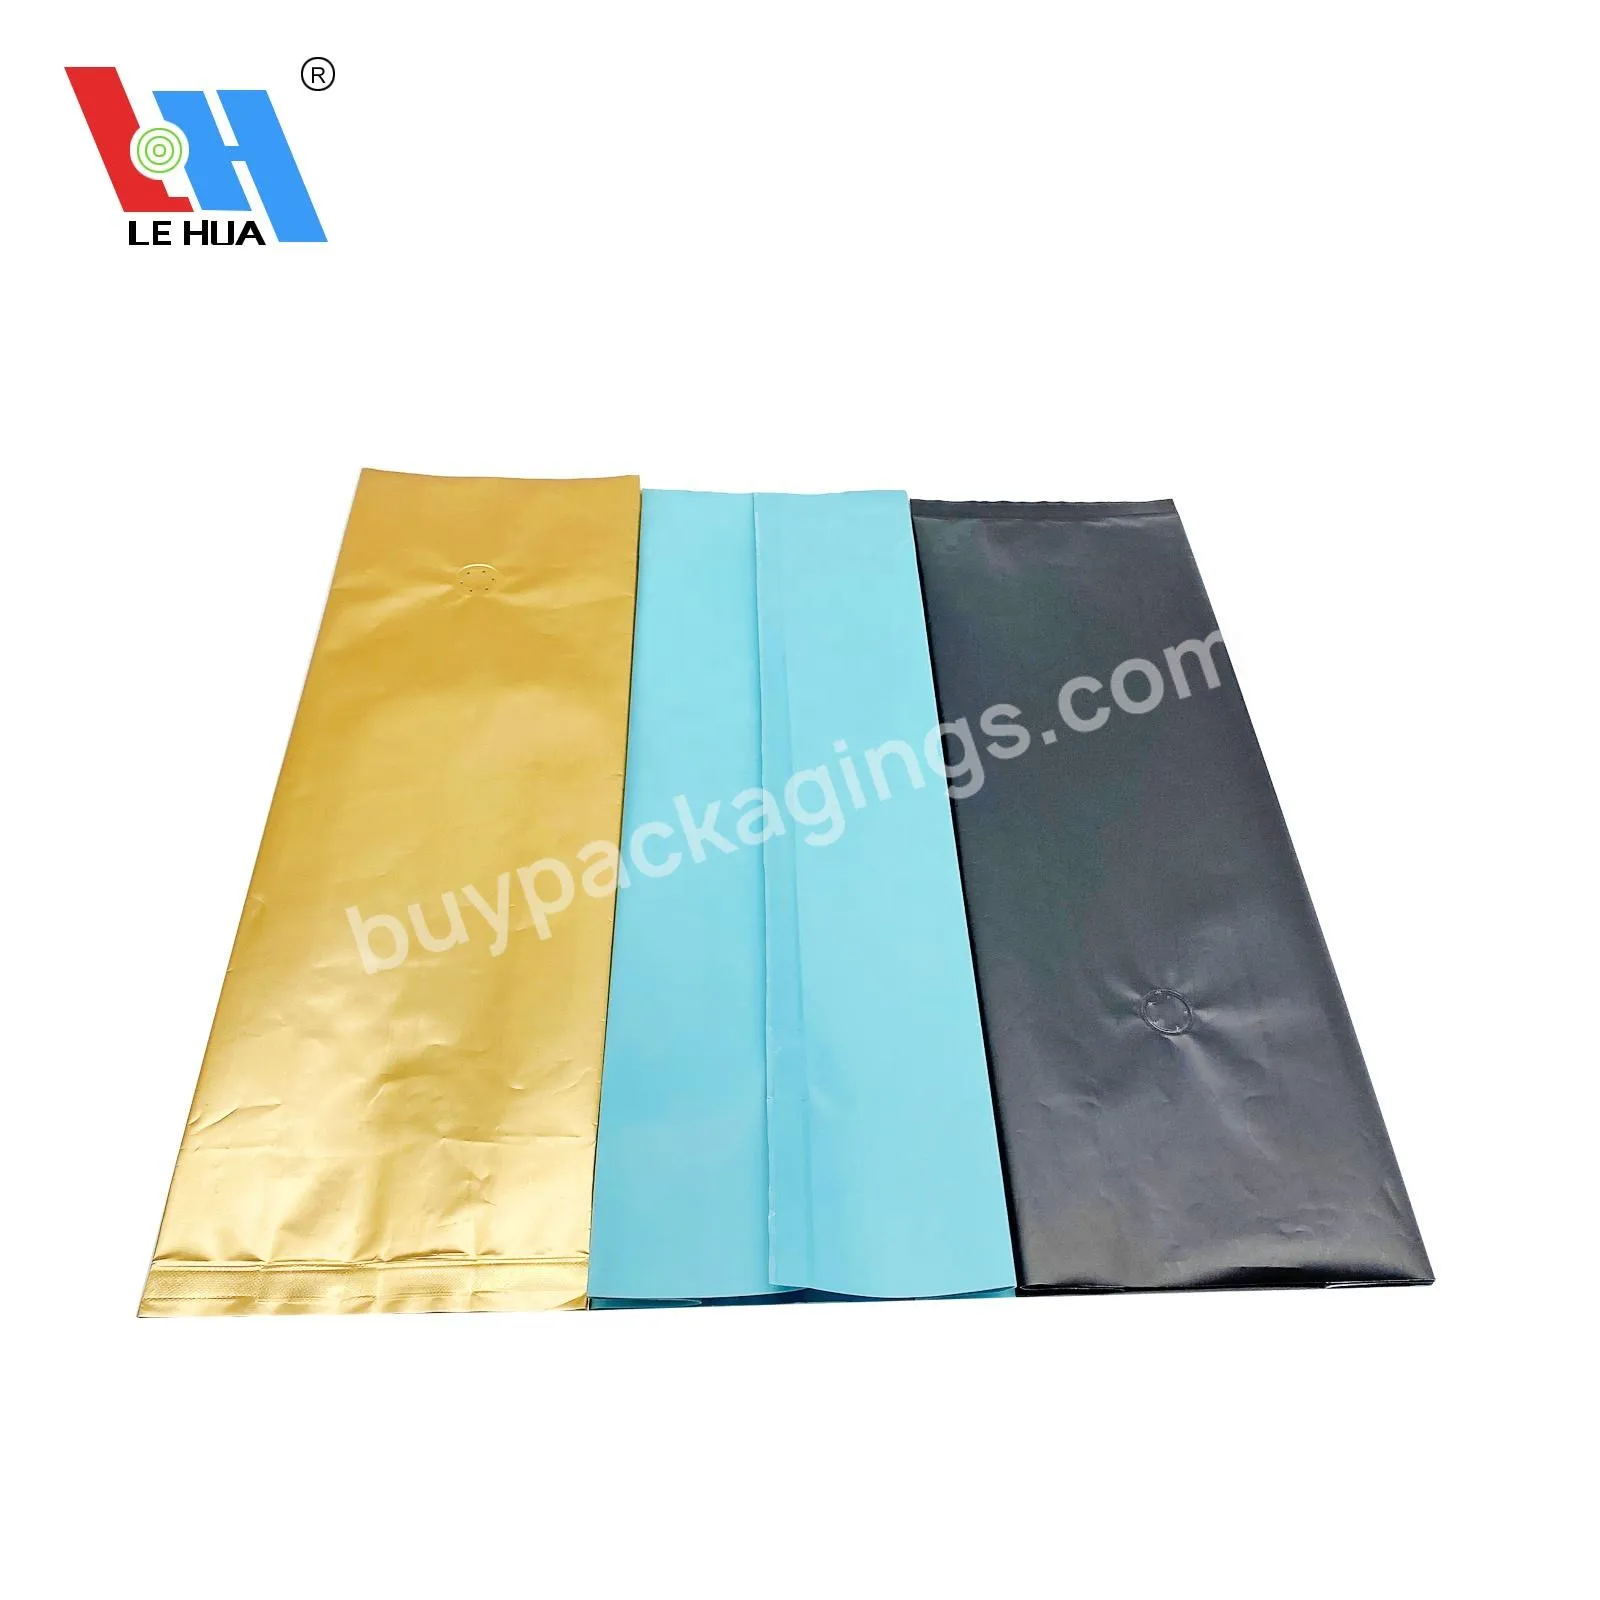 New Design Custom Printed Aluminum Foil Heat Seal Plastic Coffee Packaging Bags With Valve - Buy Plastic Paper Coffee Bag,Recyclable Stand Up Pouch Coffee,Aluminum Foil Coffee Bag.